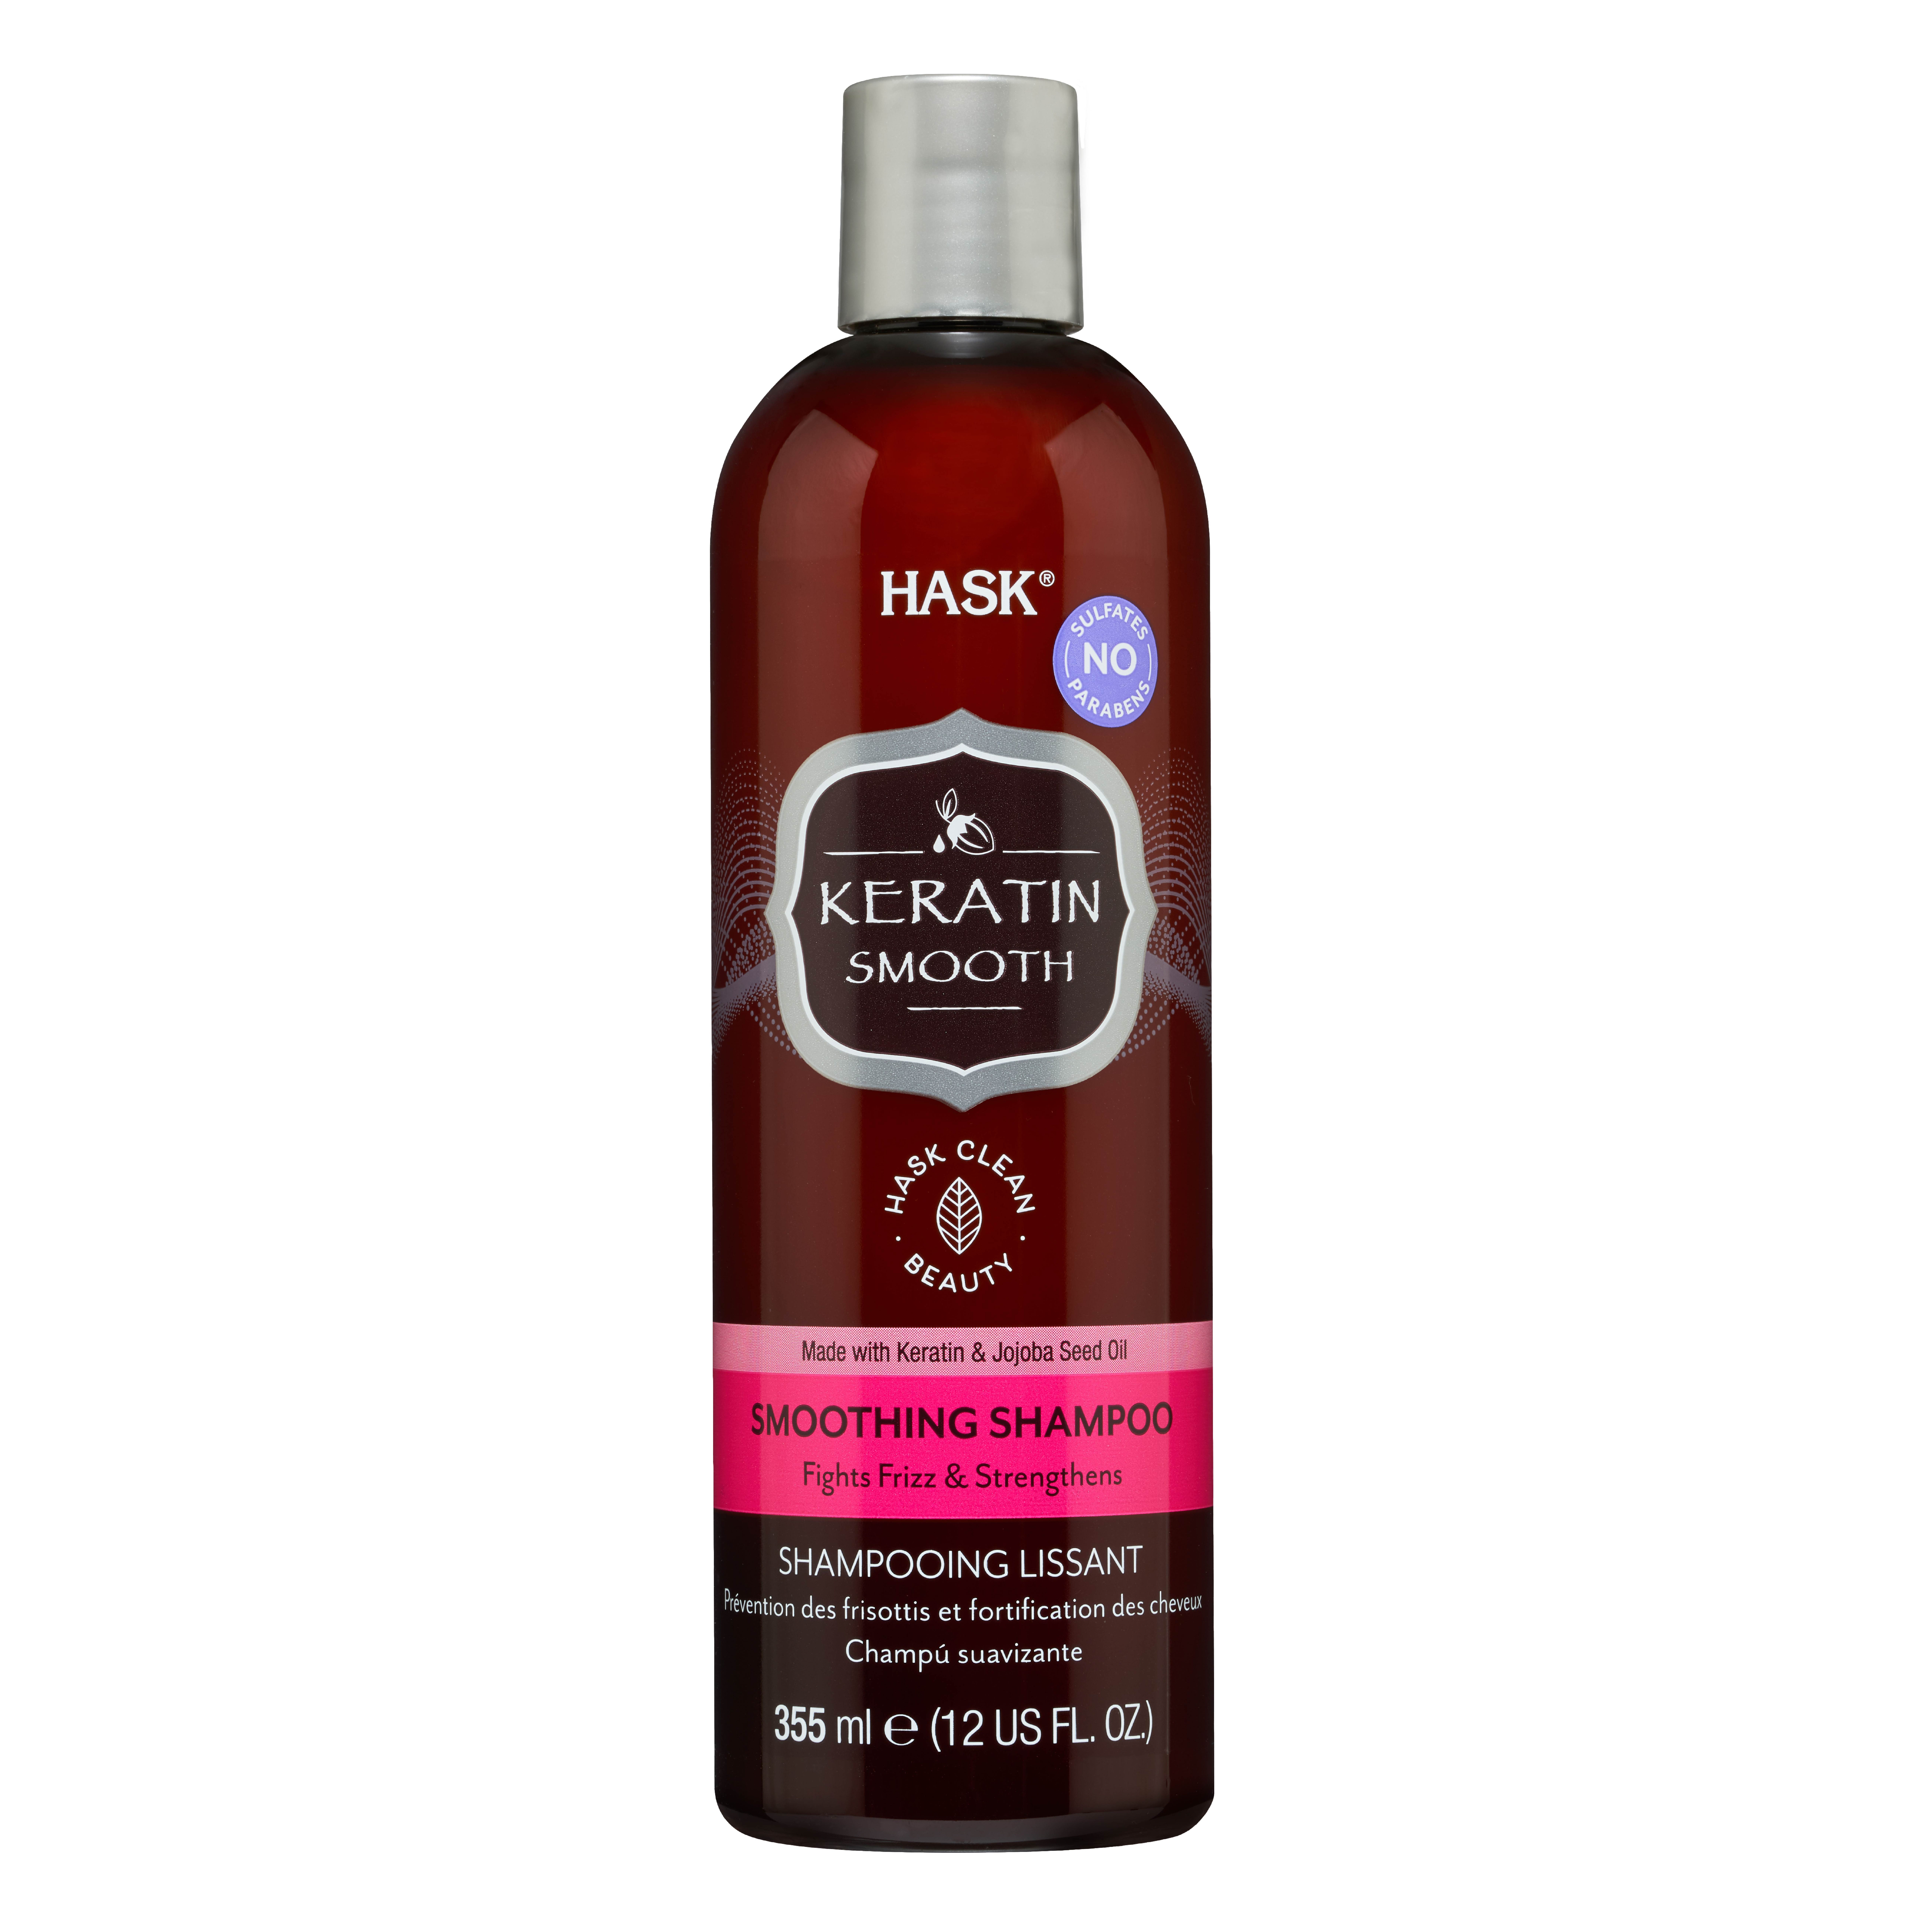 Hask Keratin Protein Smoothing Shine Enhancing Daily Shampoo with Fruity Floral Scent, 12 fl oz - image 1 of 14